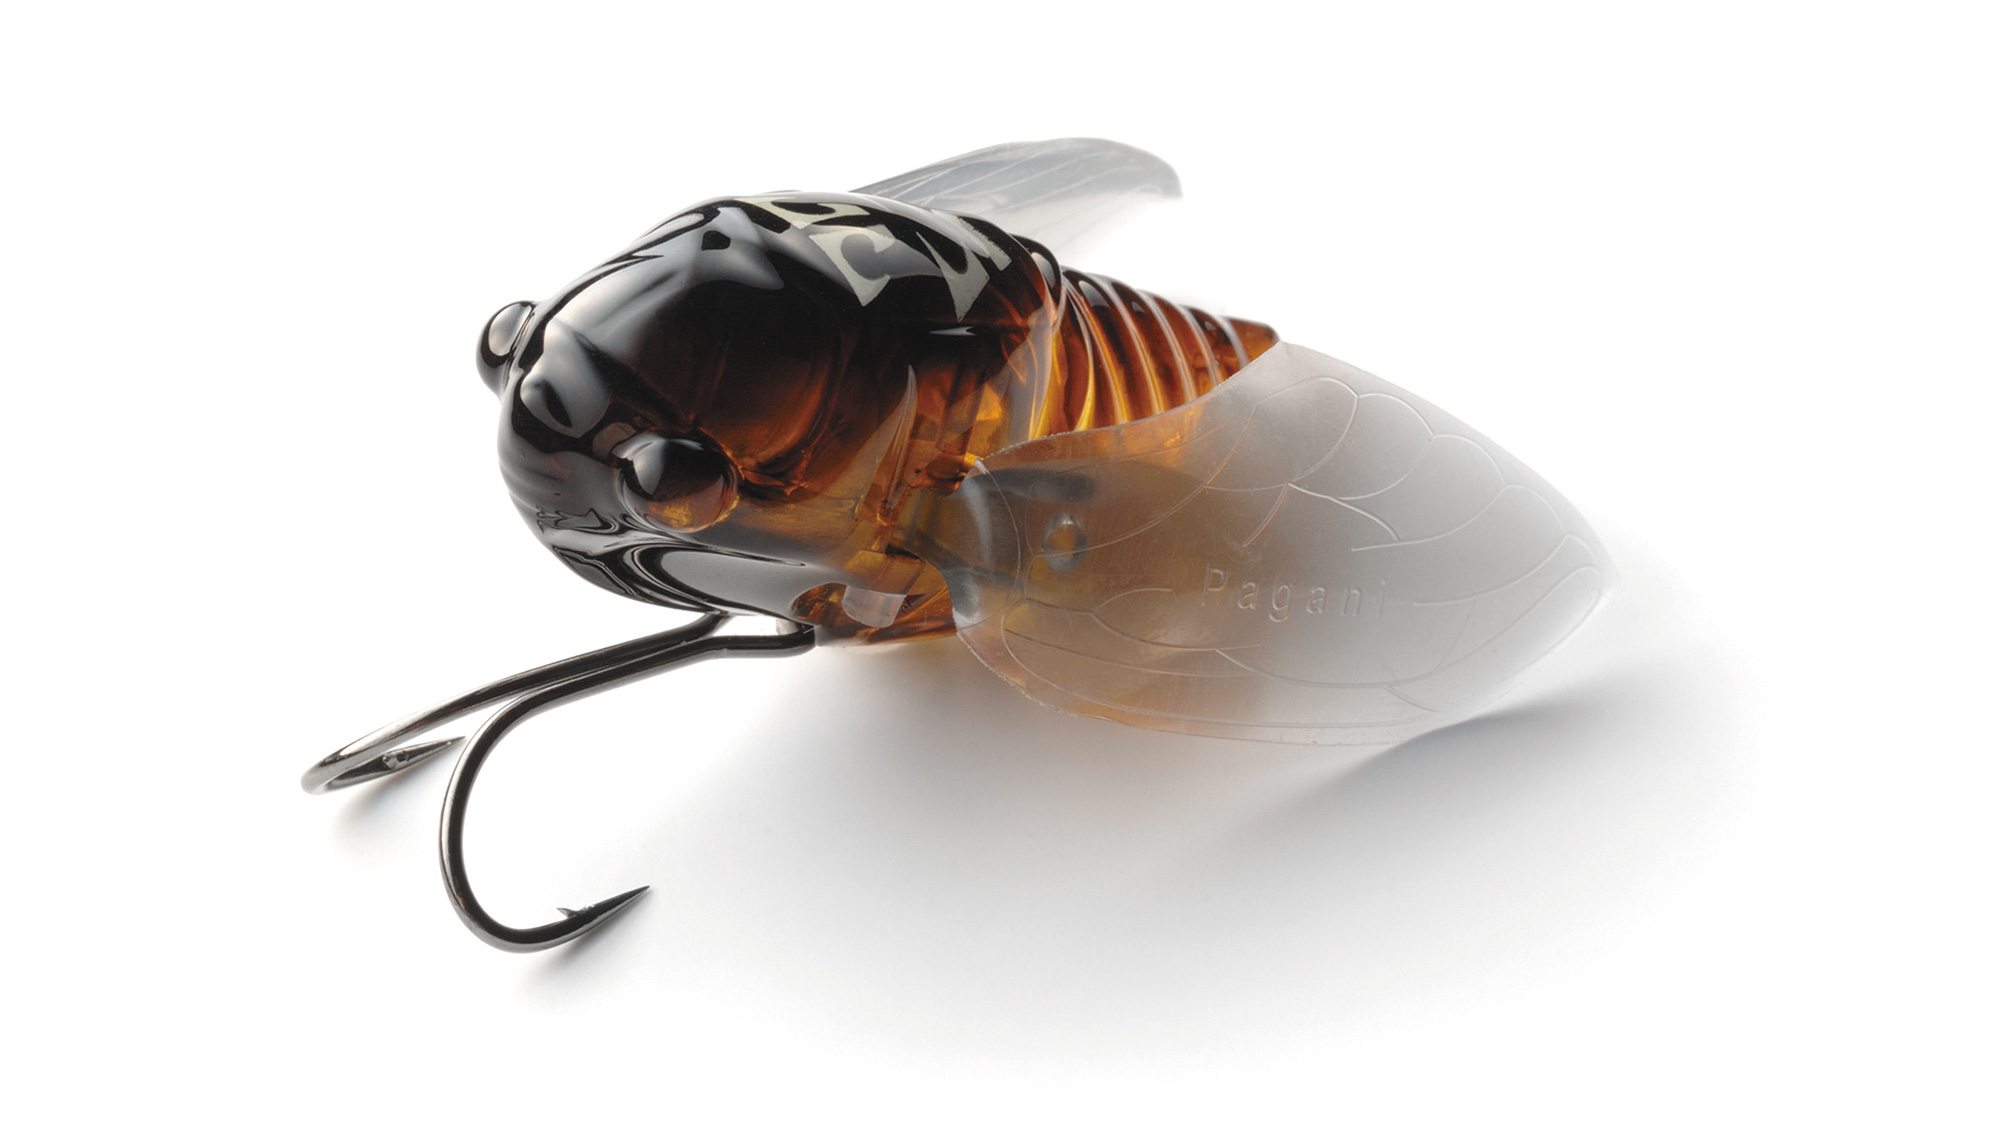 Megabass GRAND SIGLETT - Take your bug game to the next level